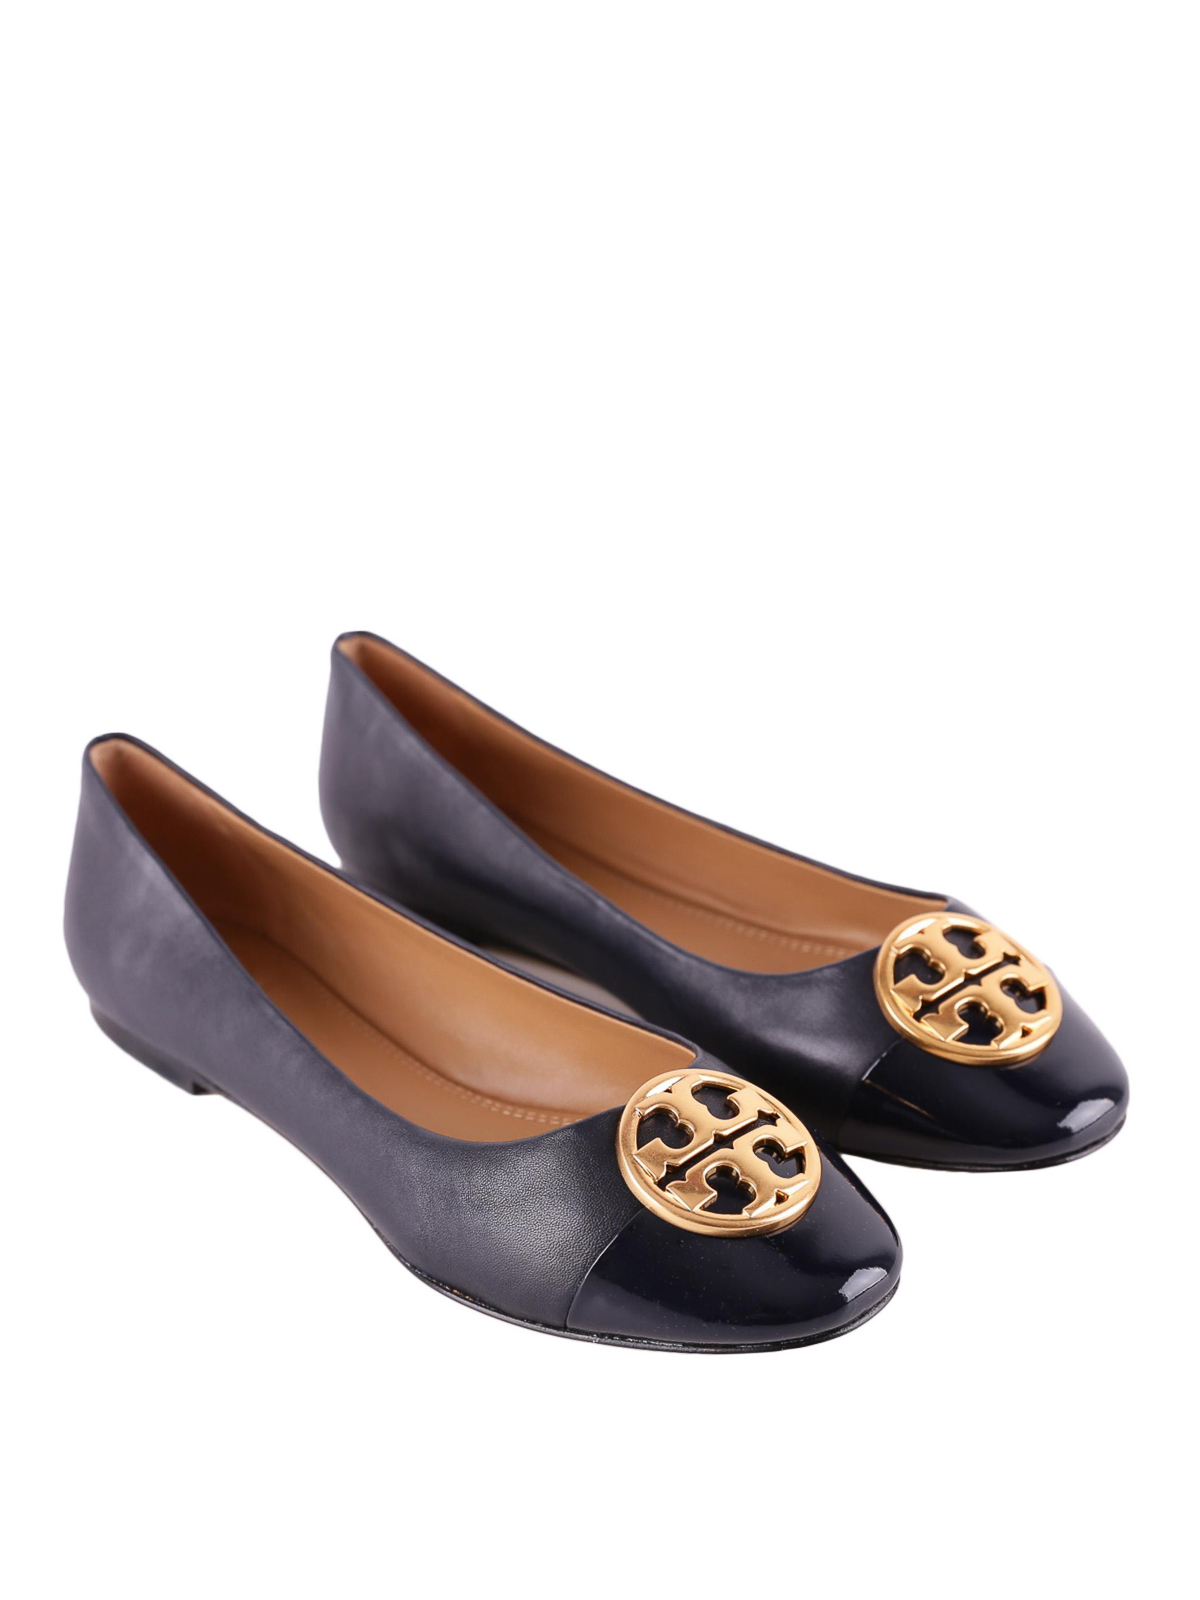 tory burch shoes chelsea